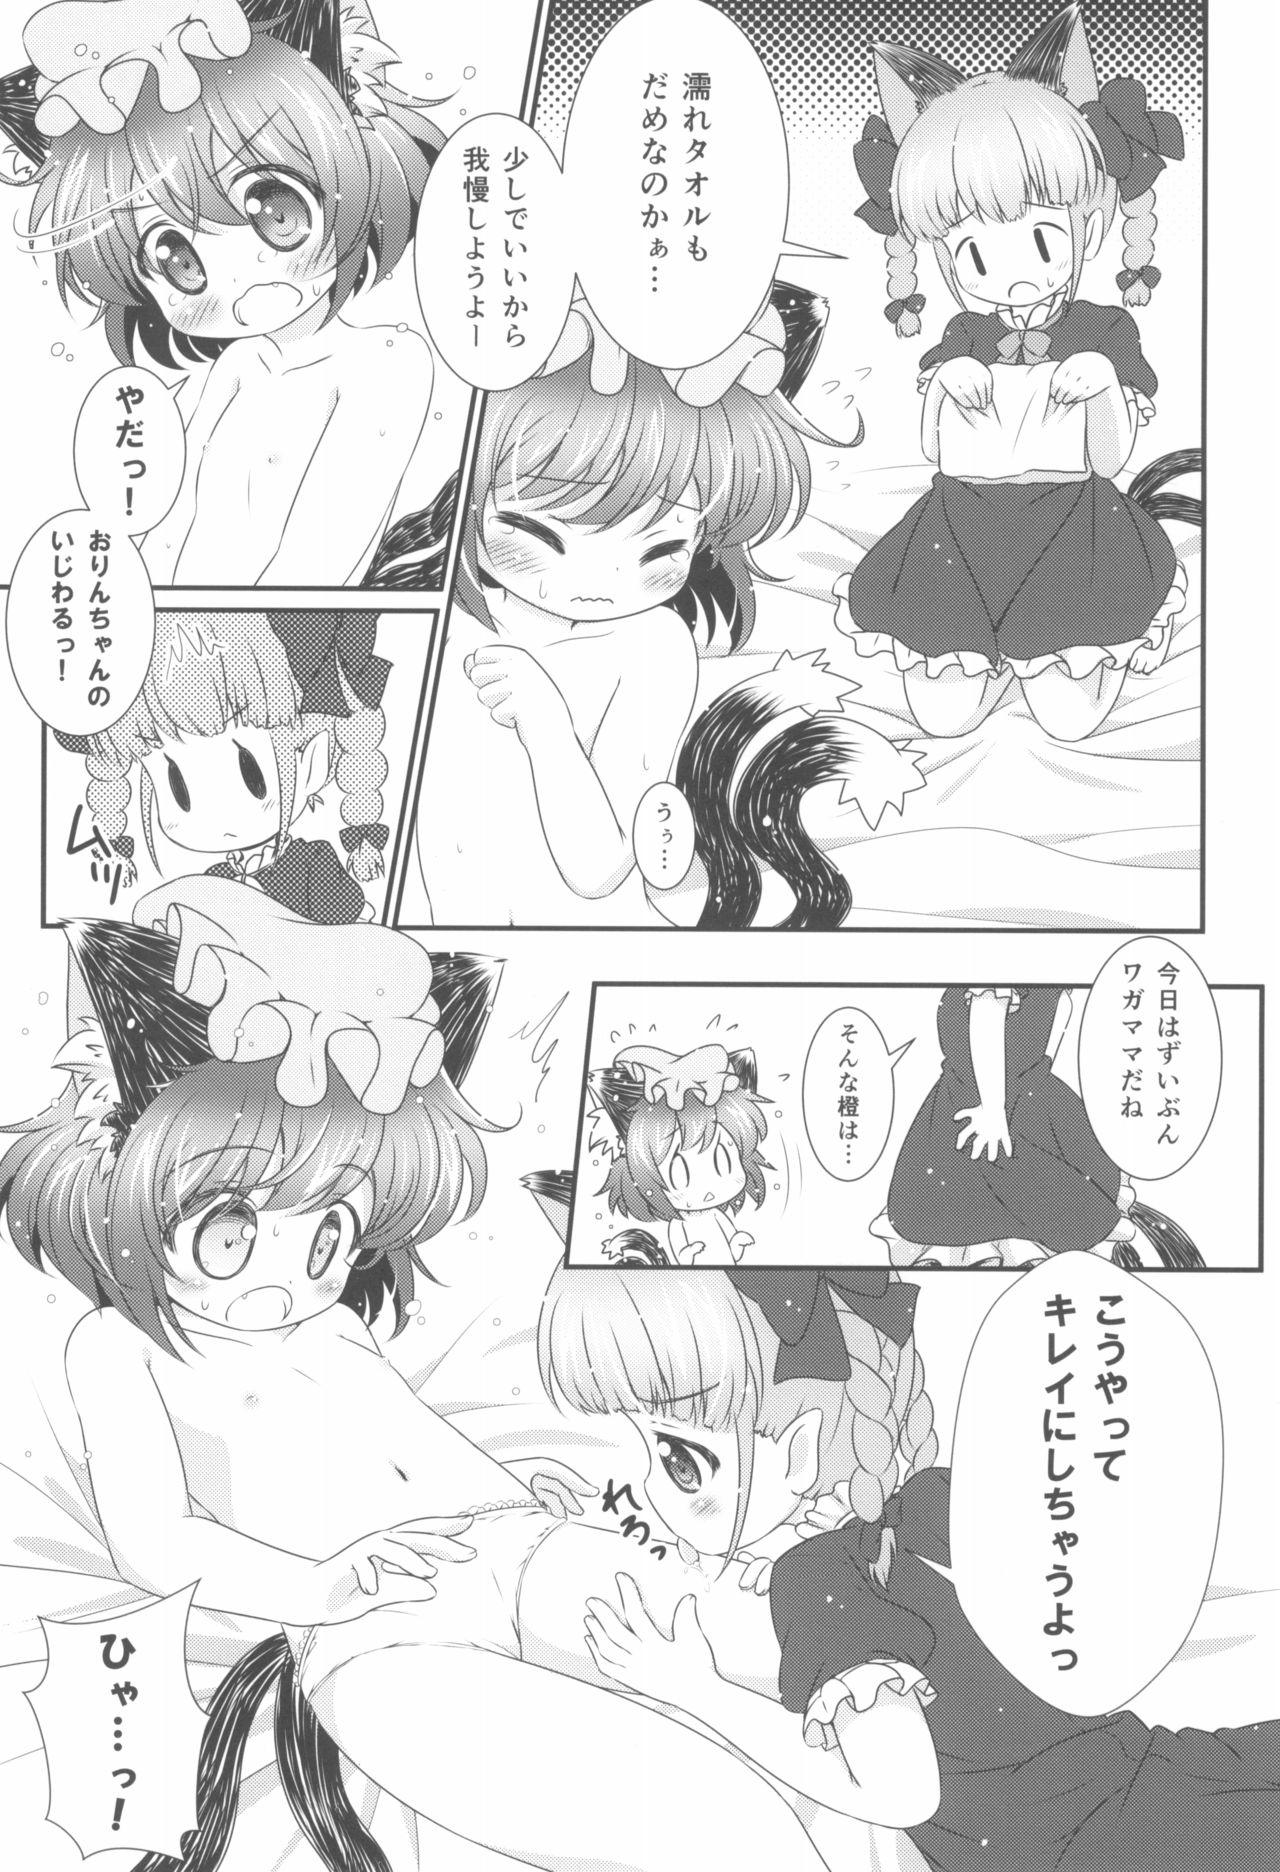 Anime Deodorizing - Touhou project Best Blowjob - Page 11